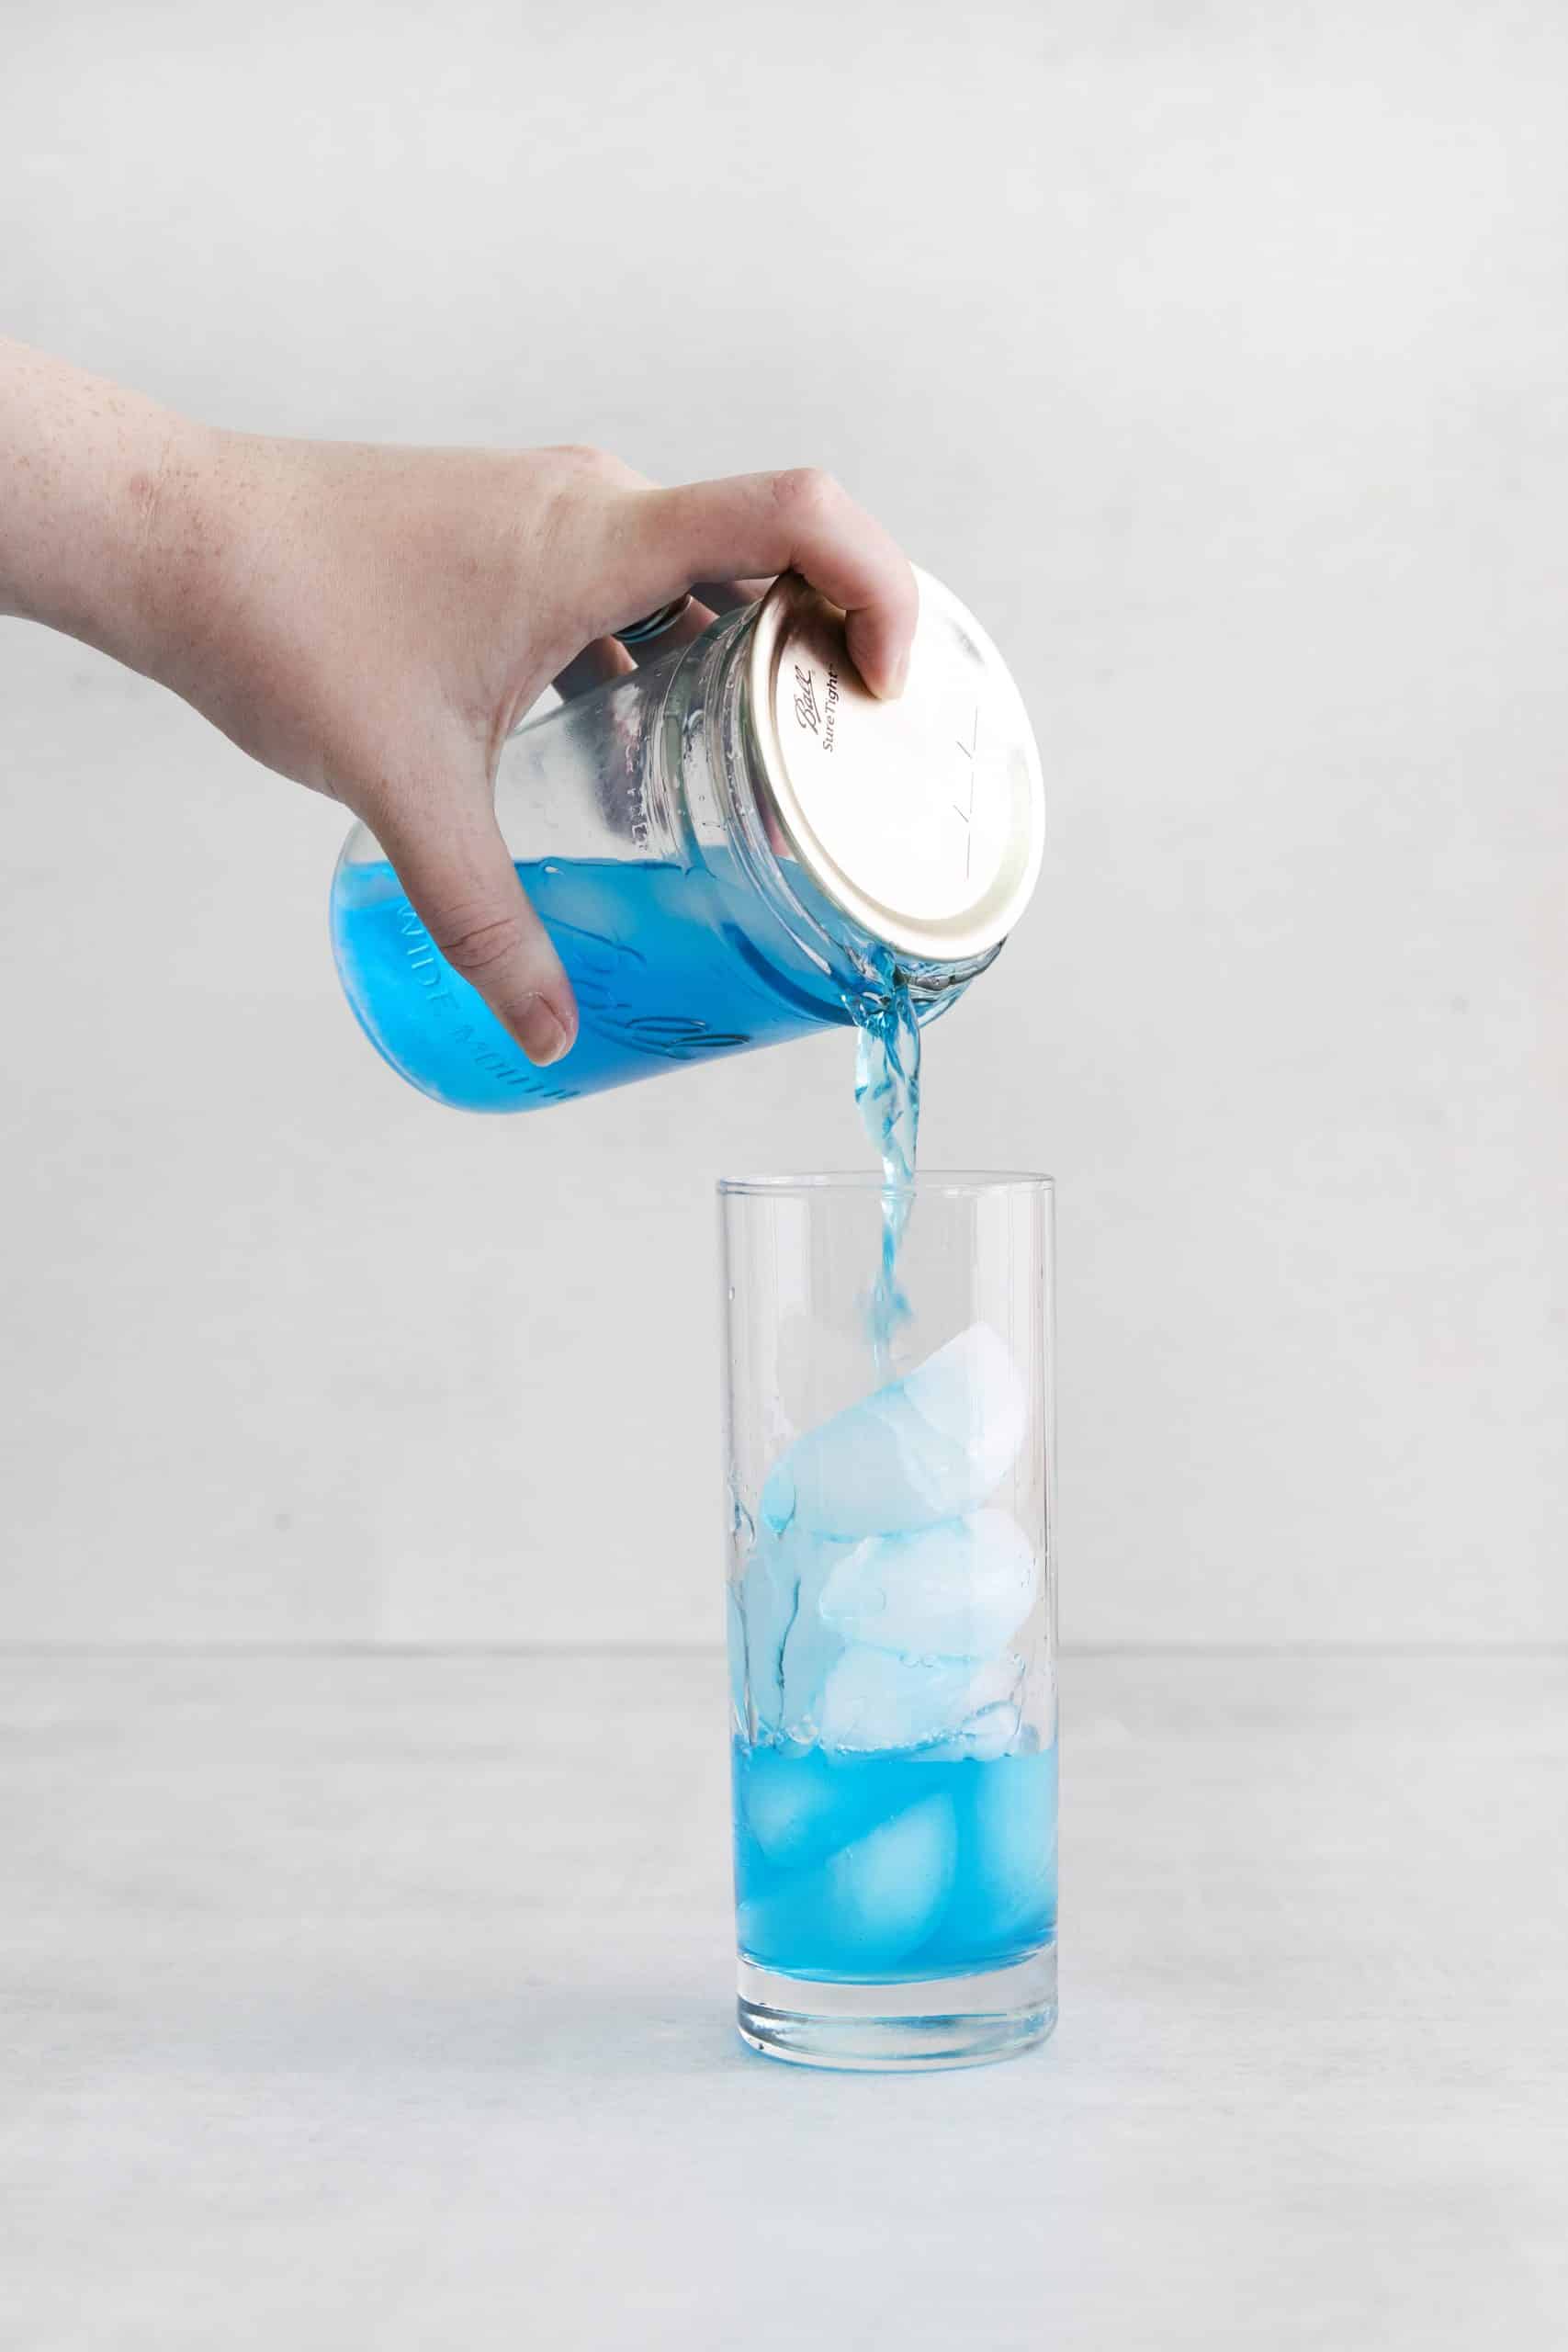 ball jar pouring blue liquid out into a tall glass